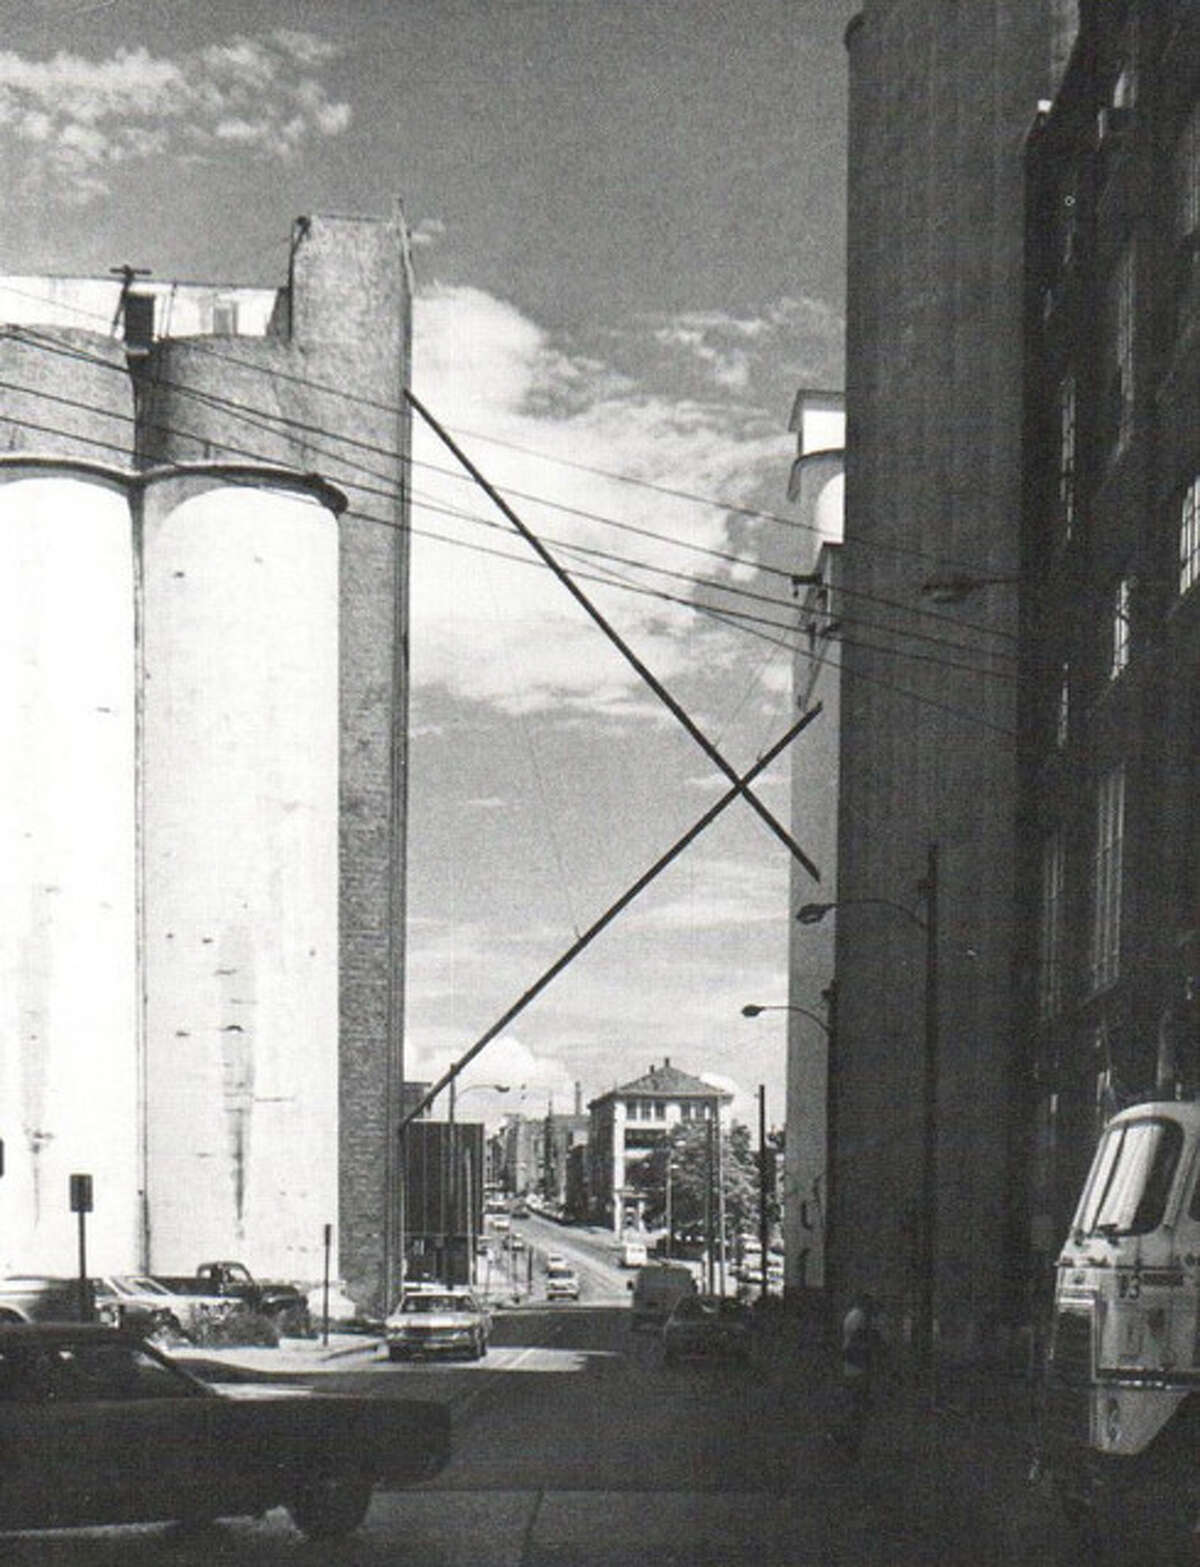 A scene at the intersection of West Broadway and State Streets shows the entire block of grain storage silos and milling complex. Prior to that time, State Street ended at the river. It was not unusual for a southbound car’s brakes to fail on State Street hill, quickly depositing the unfortunate car and driver into the Mississippi.